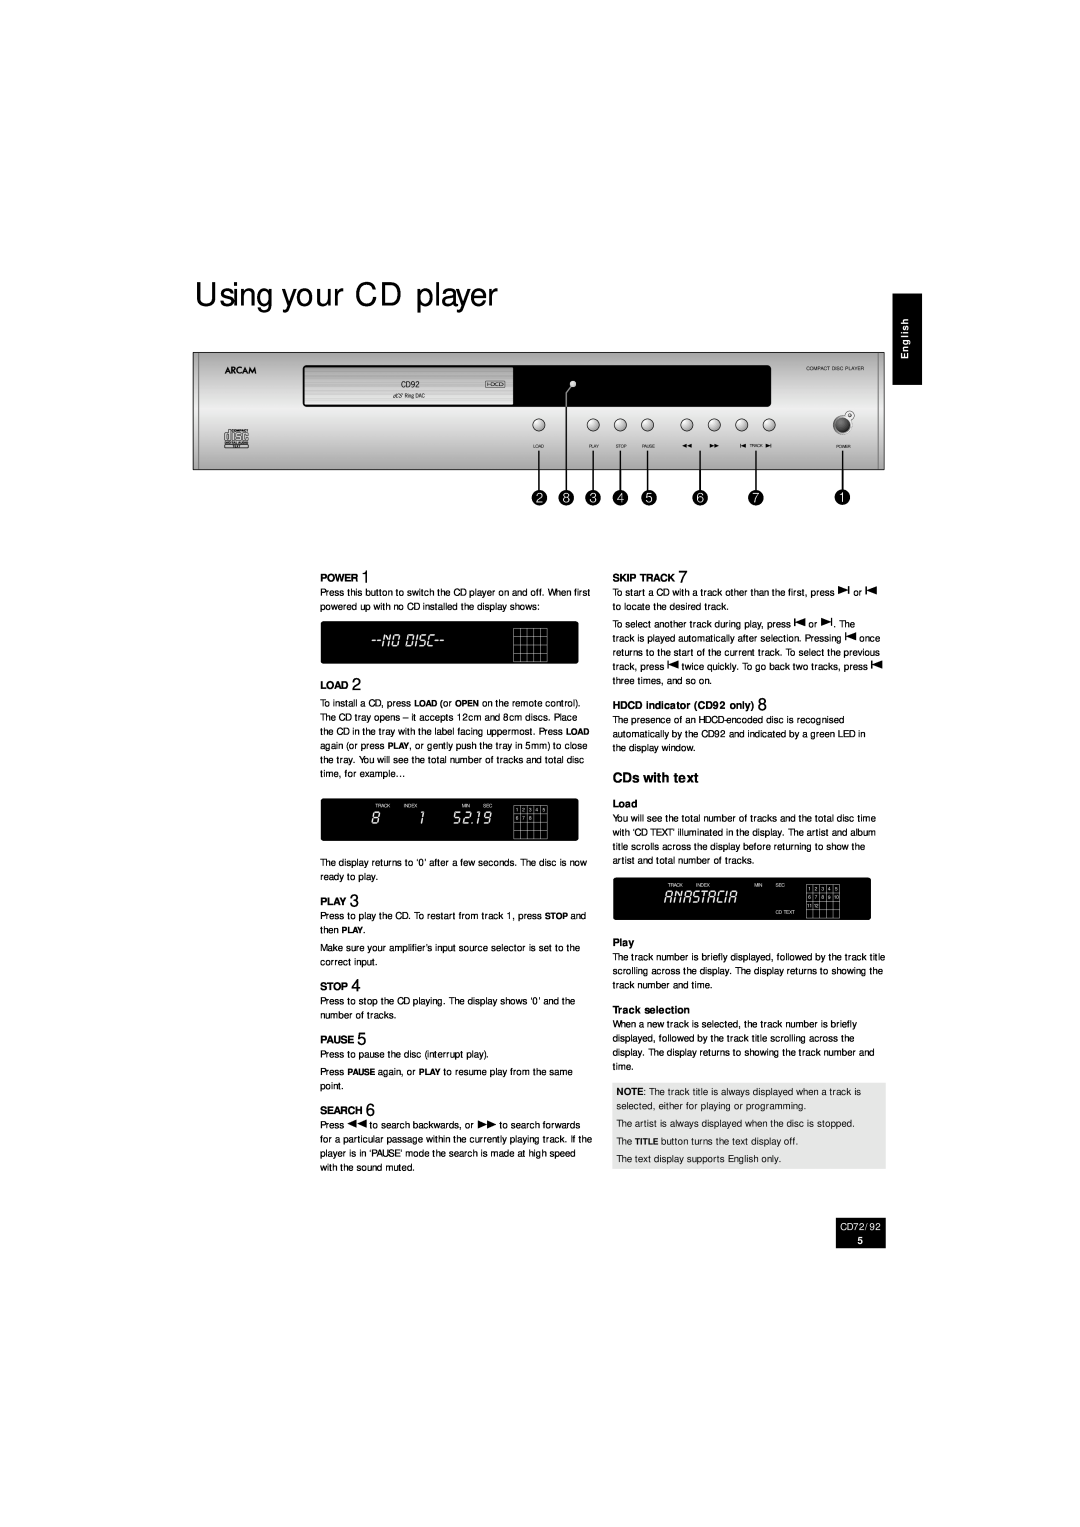 Arcam CD92 manual Using your CD player, CDs with text, No Disc, 52.19, Anastacia, CD72/92 